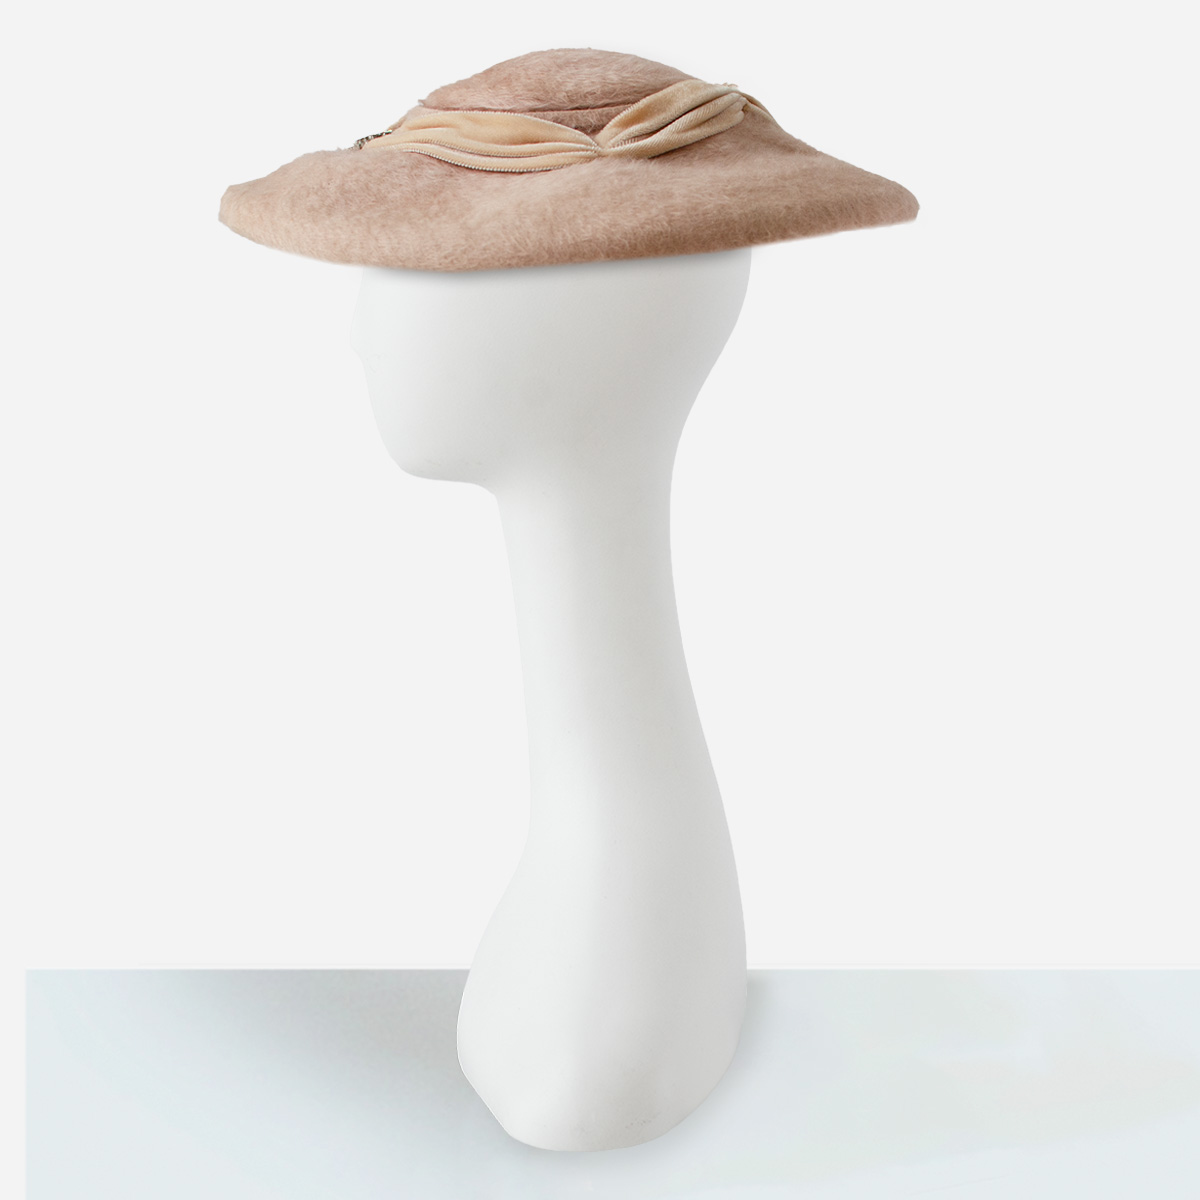 50s cocktail party hat